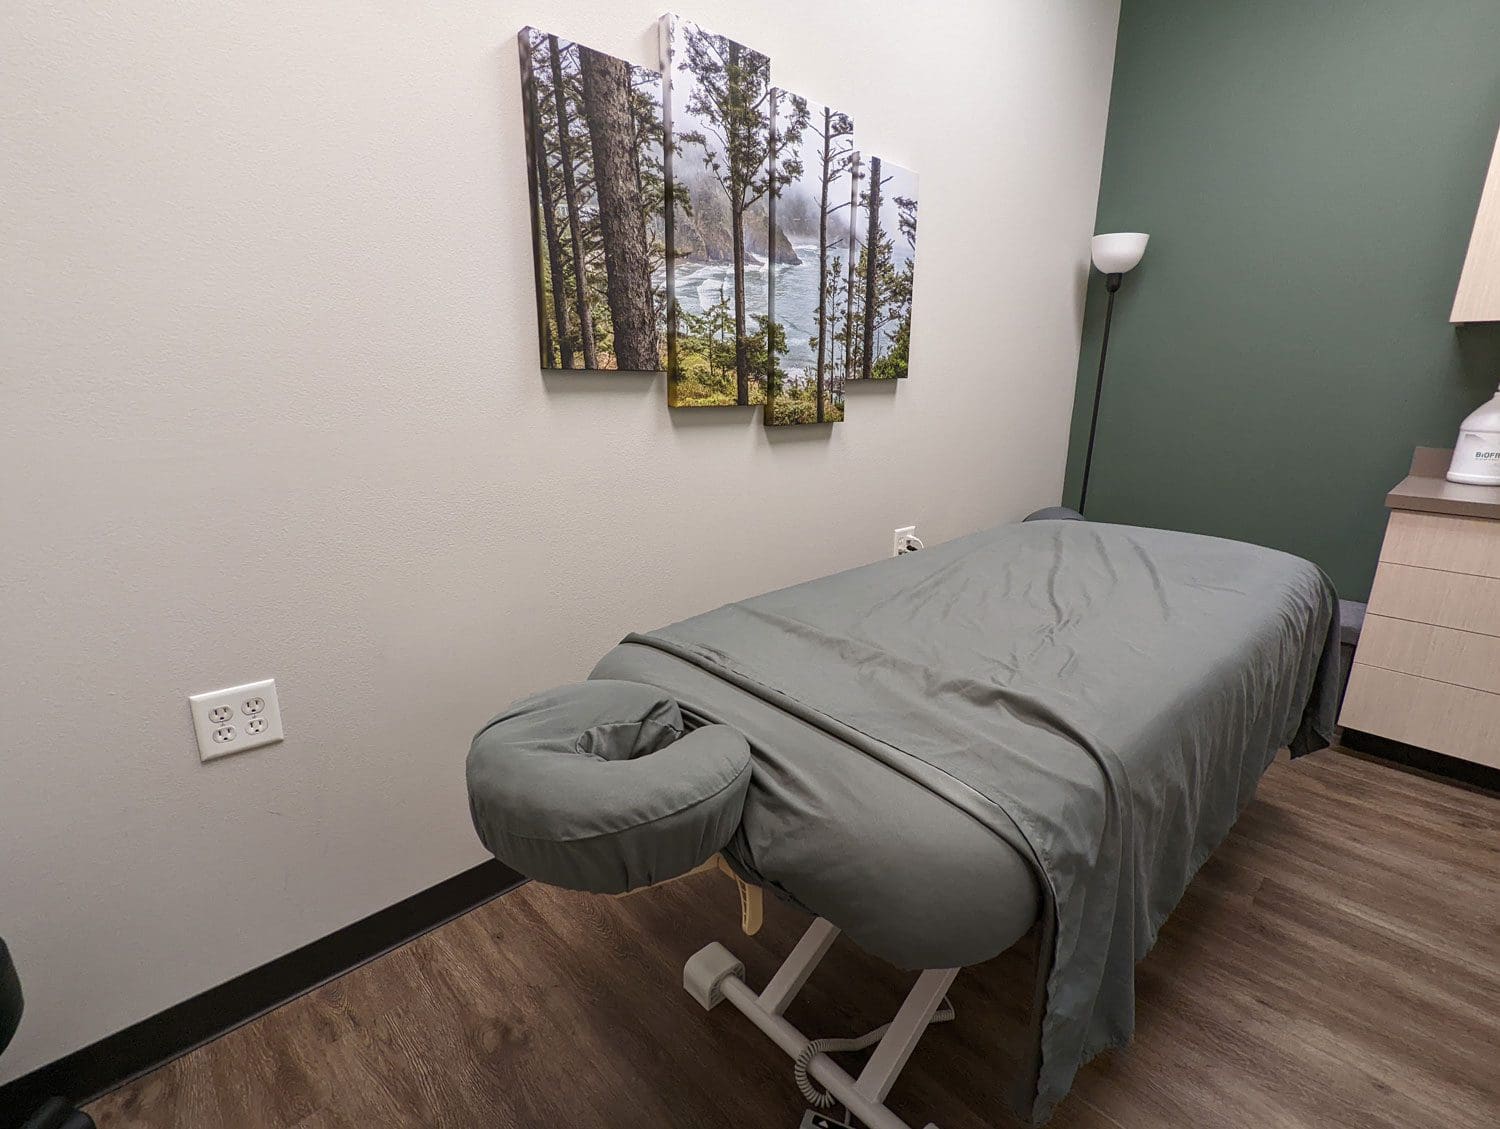 South Salem massage therapy room with massage table and wall art of the ocean seen through a forest.